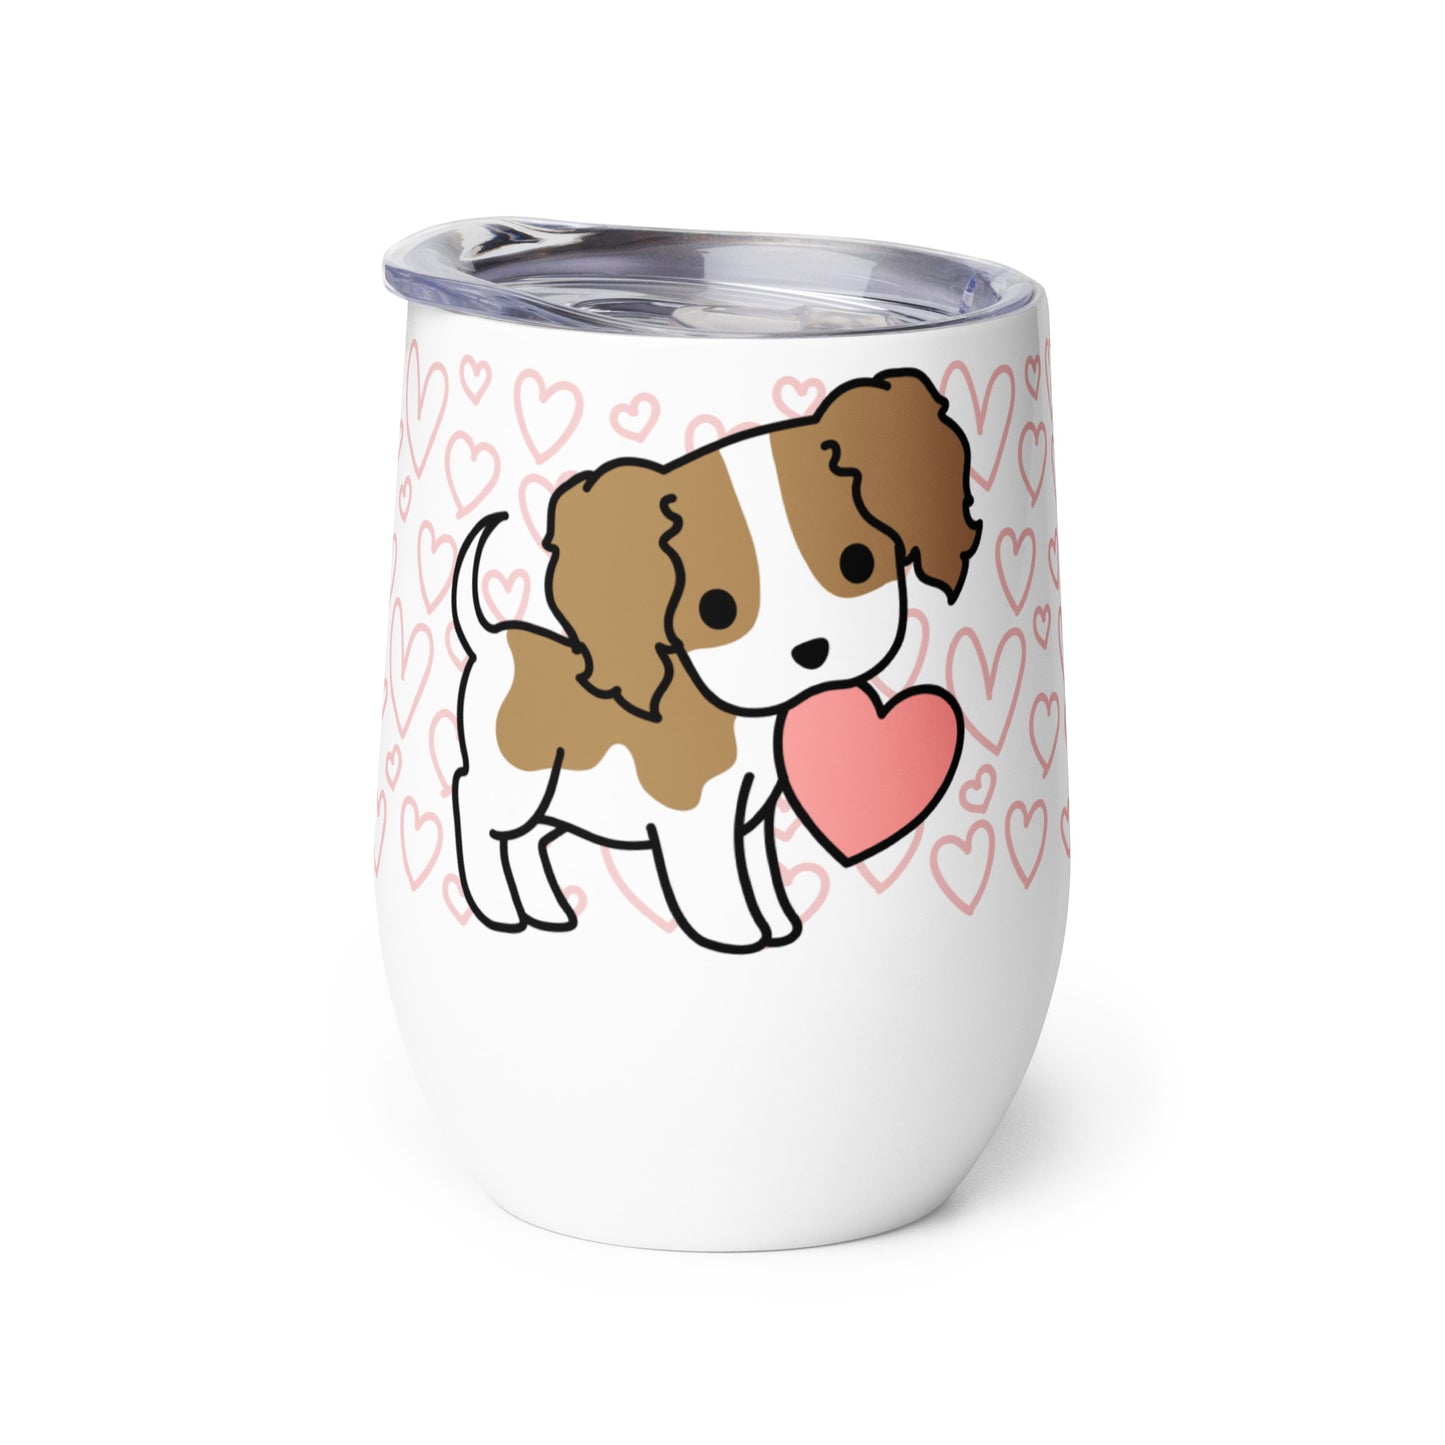 A white metal wine tumbler with a plastic lid. A pattern of hearts wraps around the top half of the tumbler. Centered on the tumbler is a cute, stylized illustration of a Cavalier King Charles Spaniel.